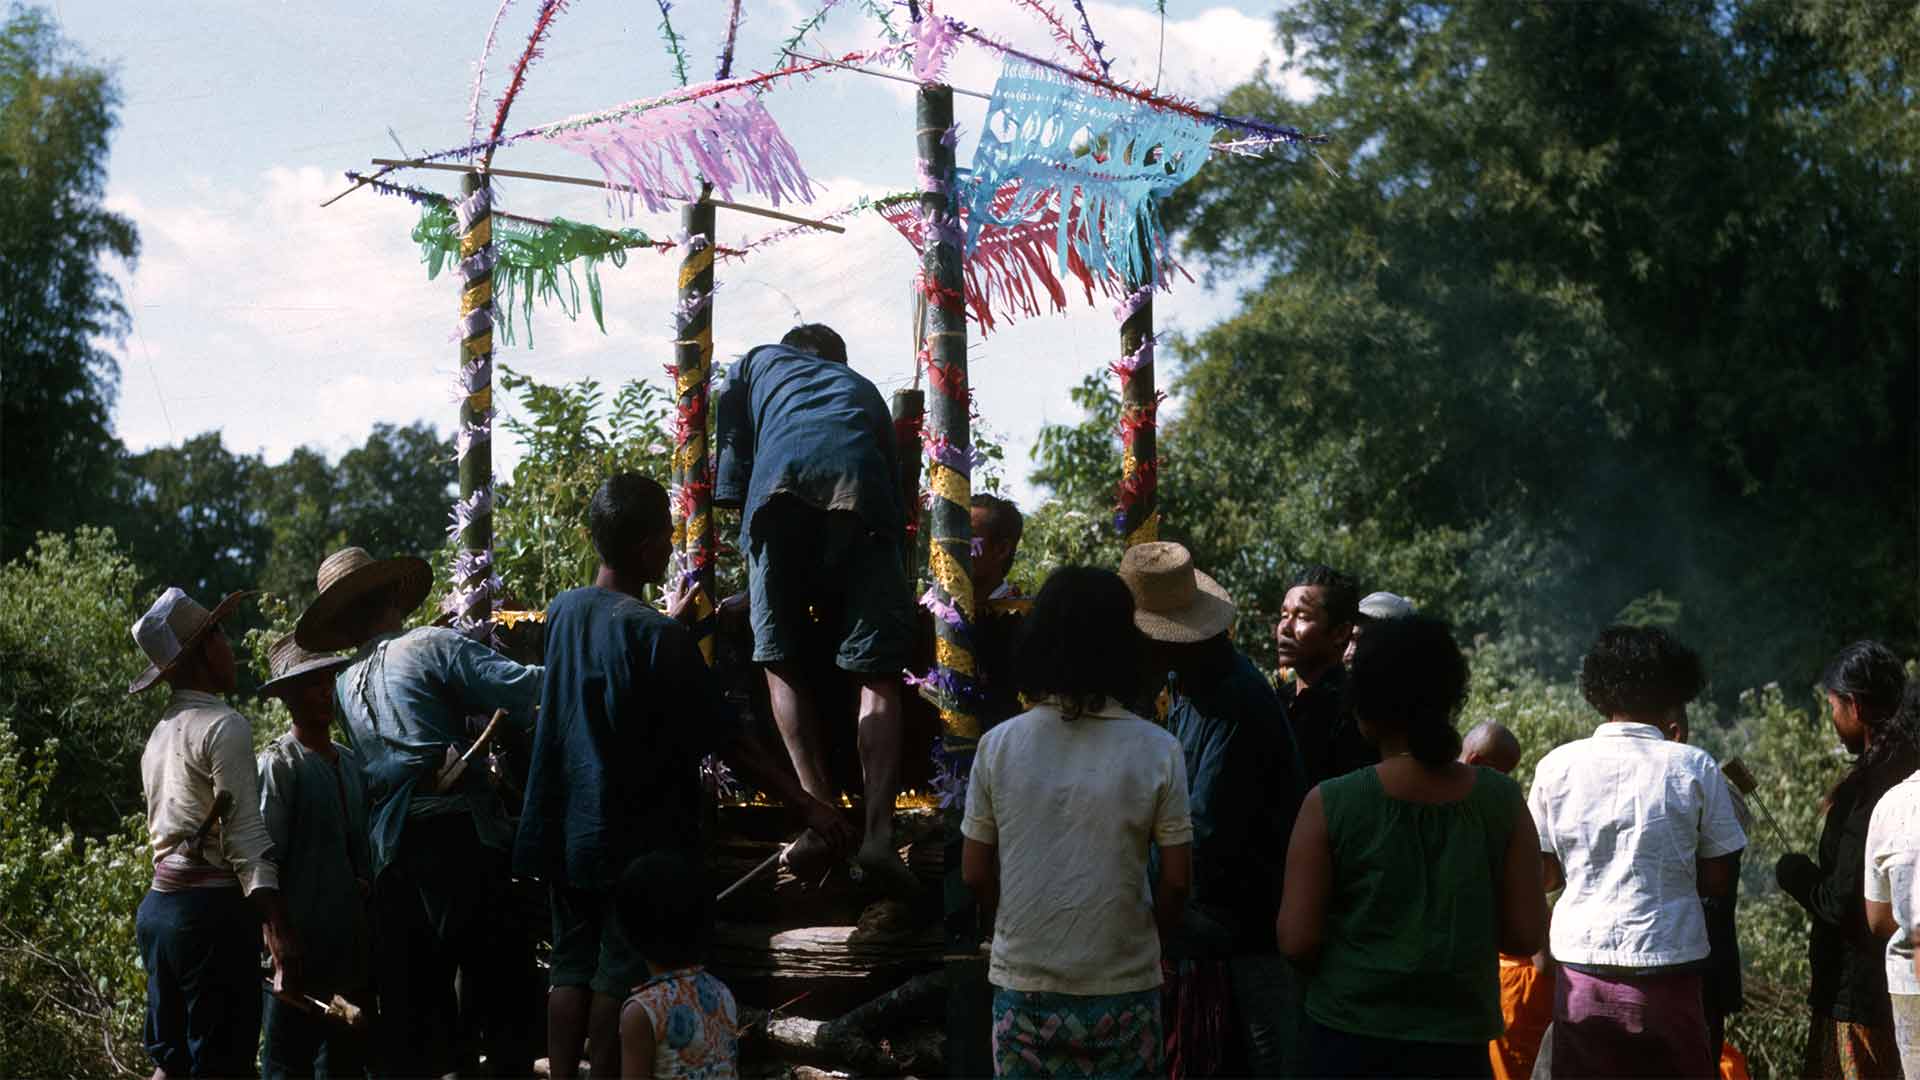 villagers gathered around decorated funeral pyre